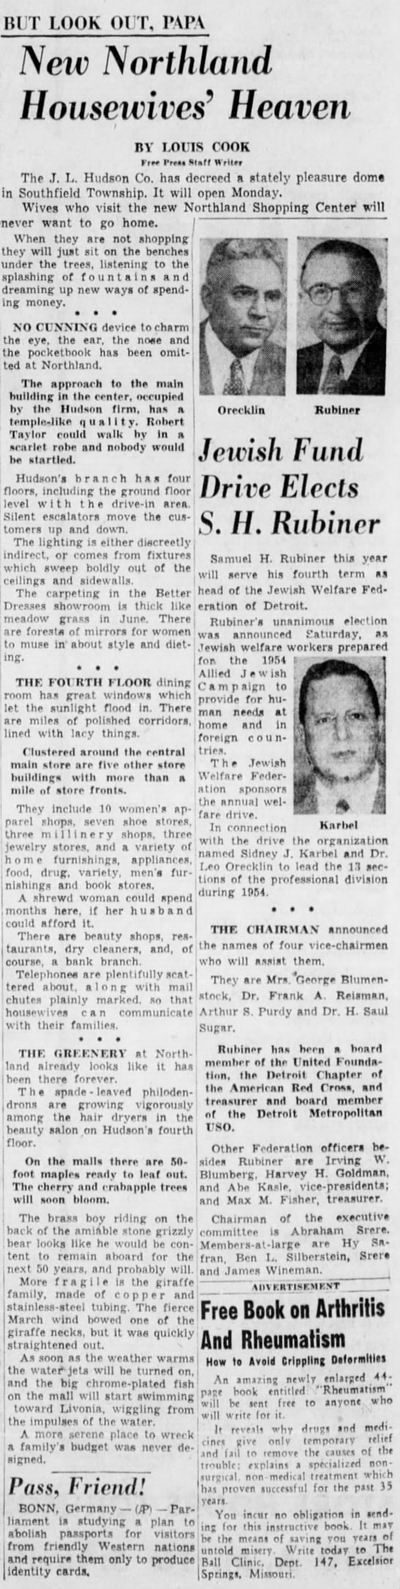 Northland Center (Northland Mall) - March 1954 Free Press Article